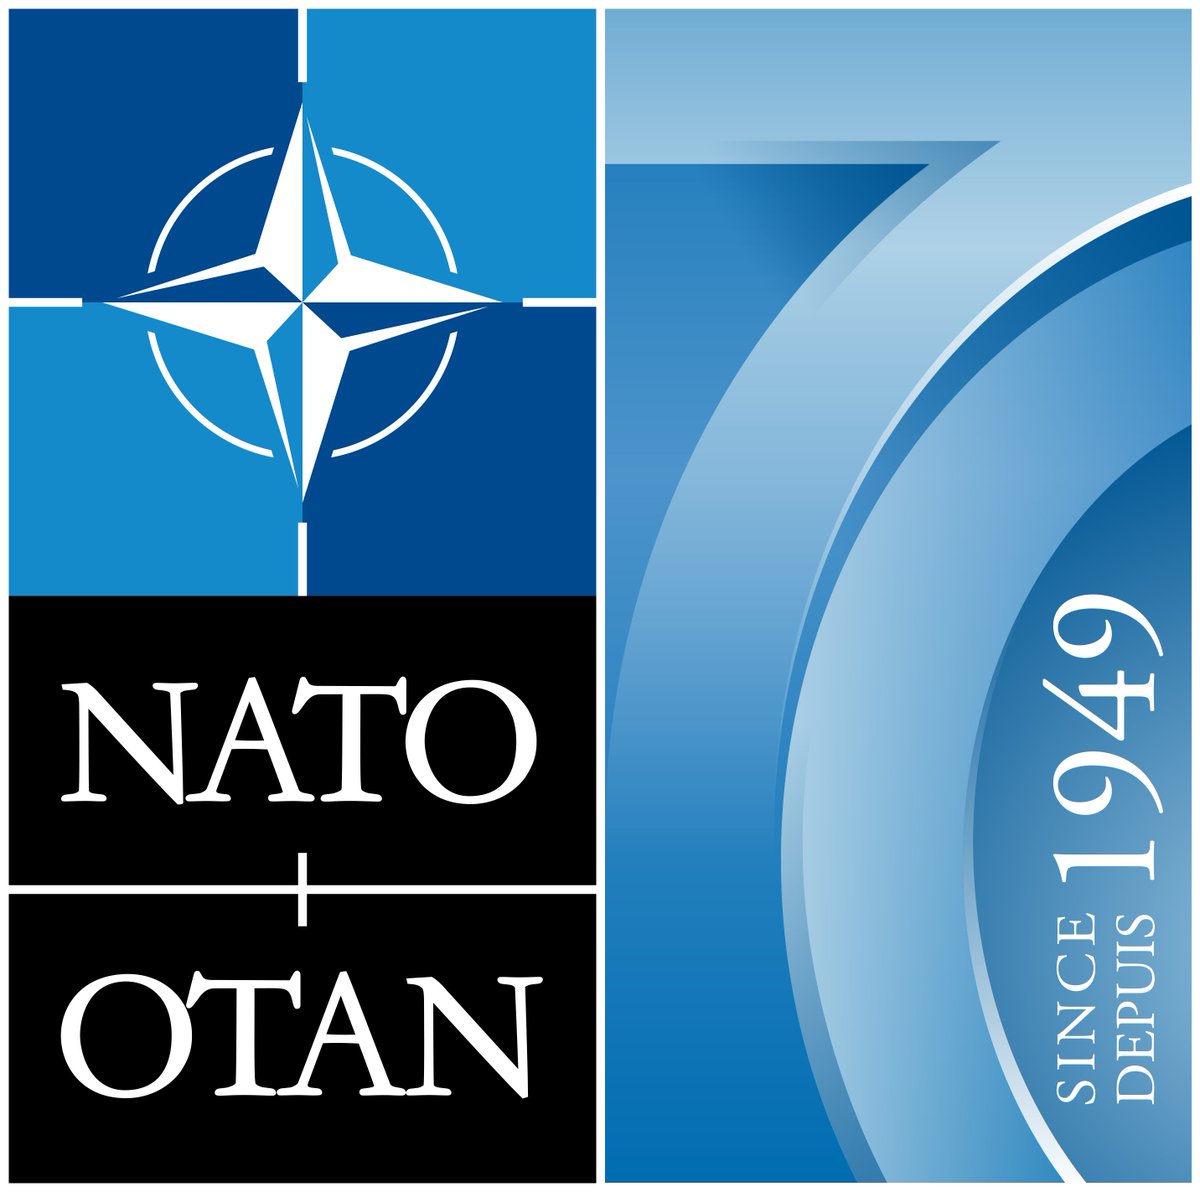 A different kind of #BlueMonday...

#NATO releases its logo marking the 70th anniversary of the founding of the Alliance. Stay tuned for more celebratory events leading up to 4 April 2019 🥳 #NATOat70  #WeAreNATO #WashingtonTreaty